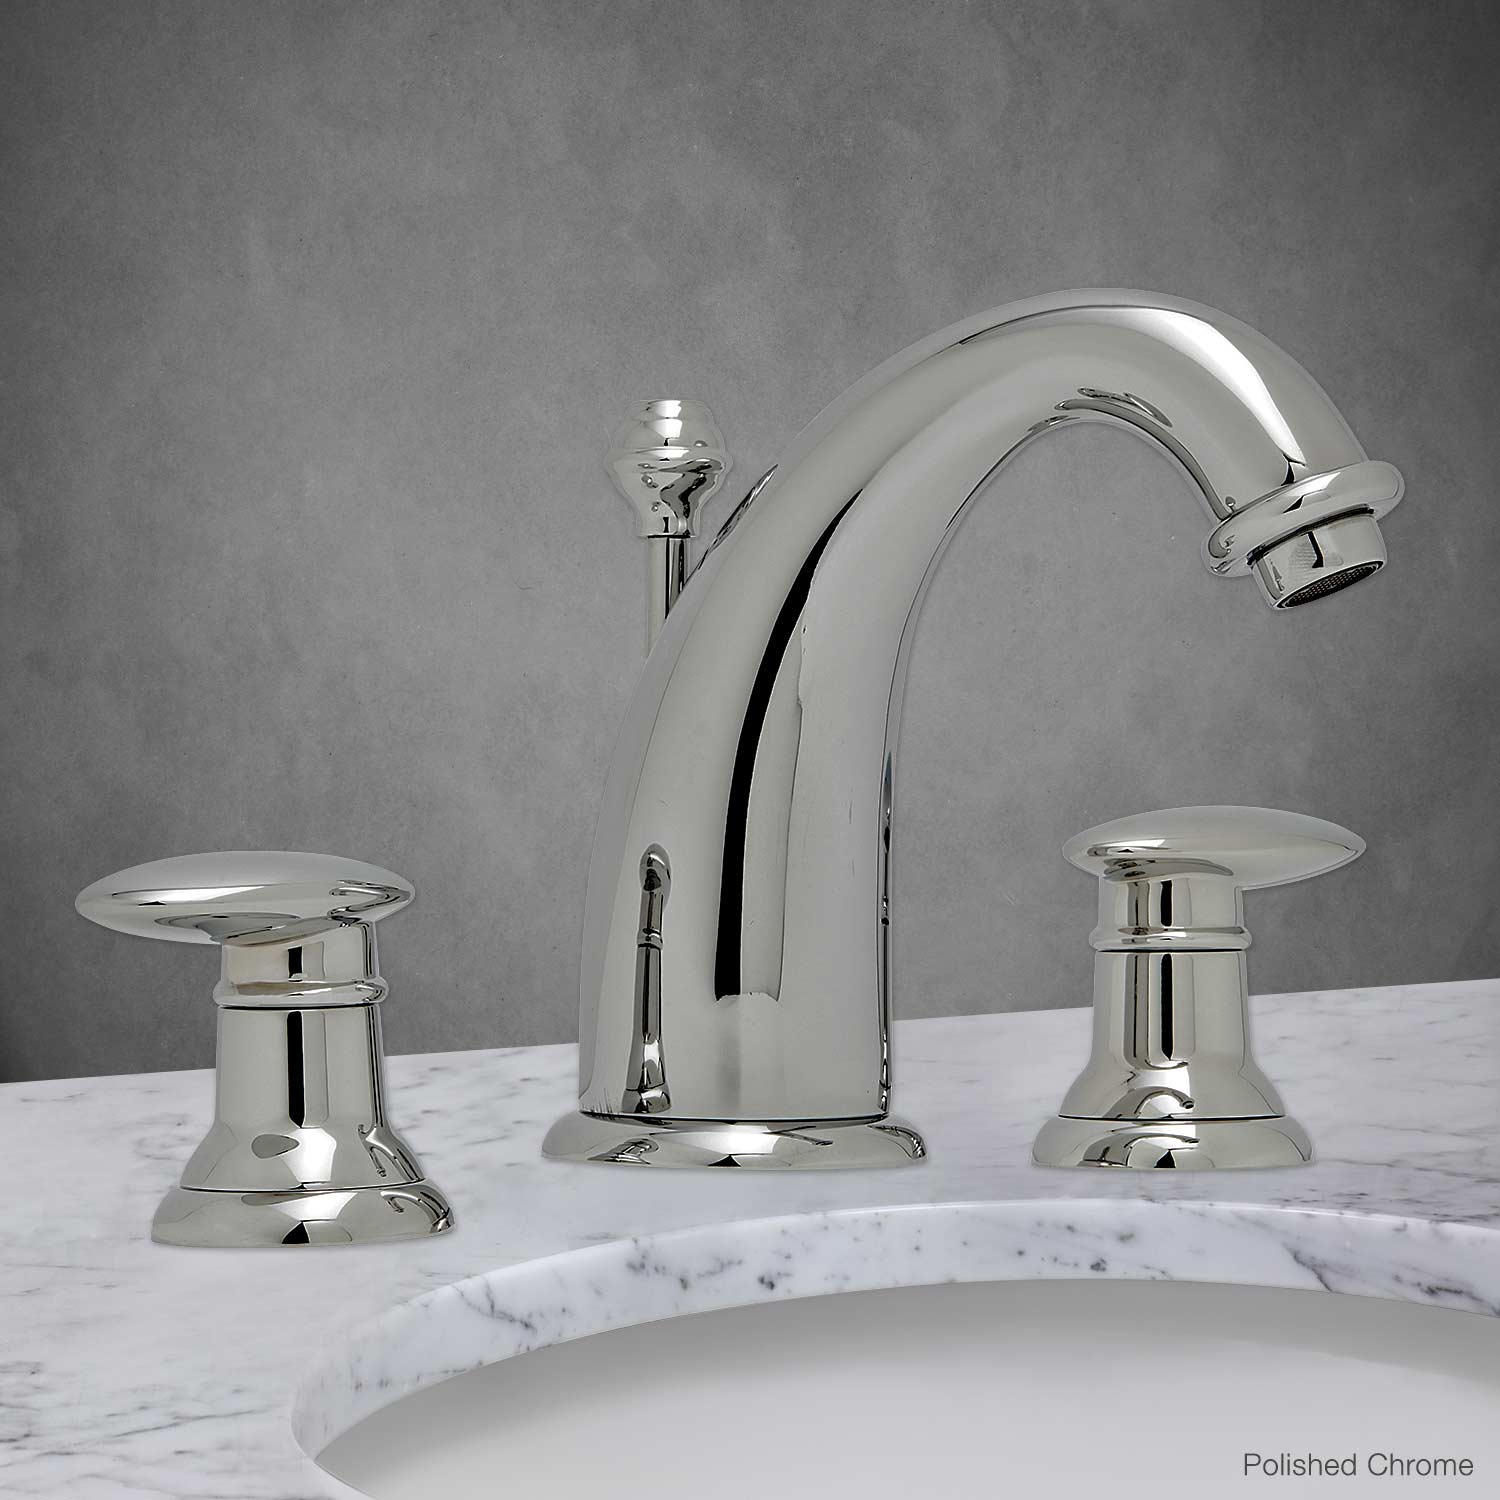 Andorra Lavatory Faucet in Polished Chrome